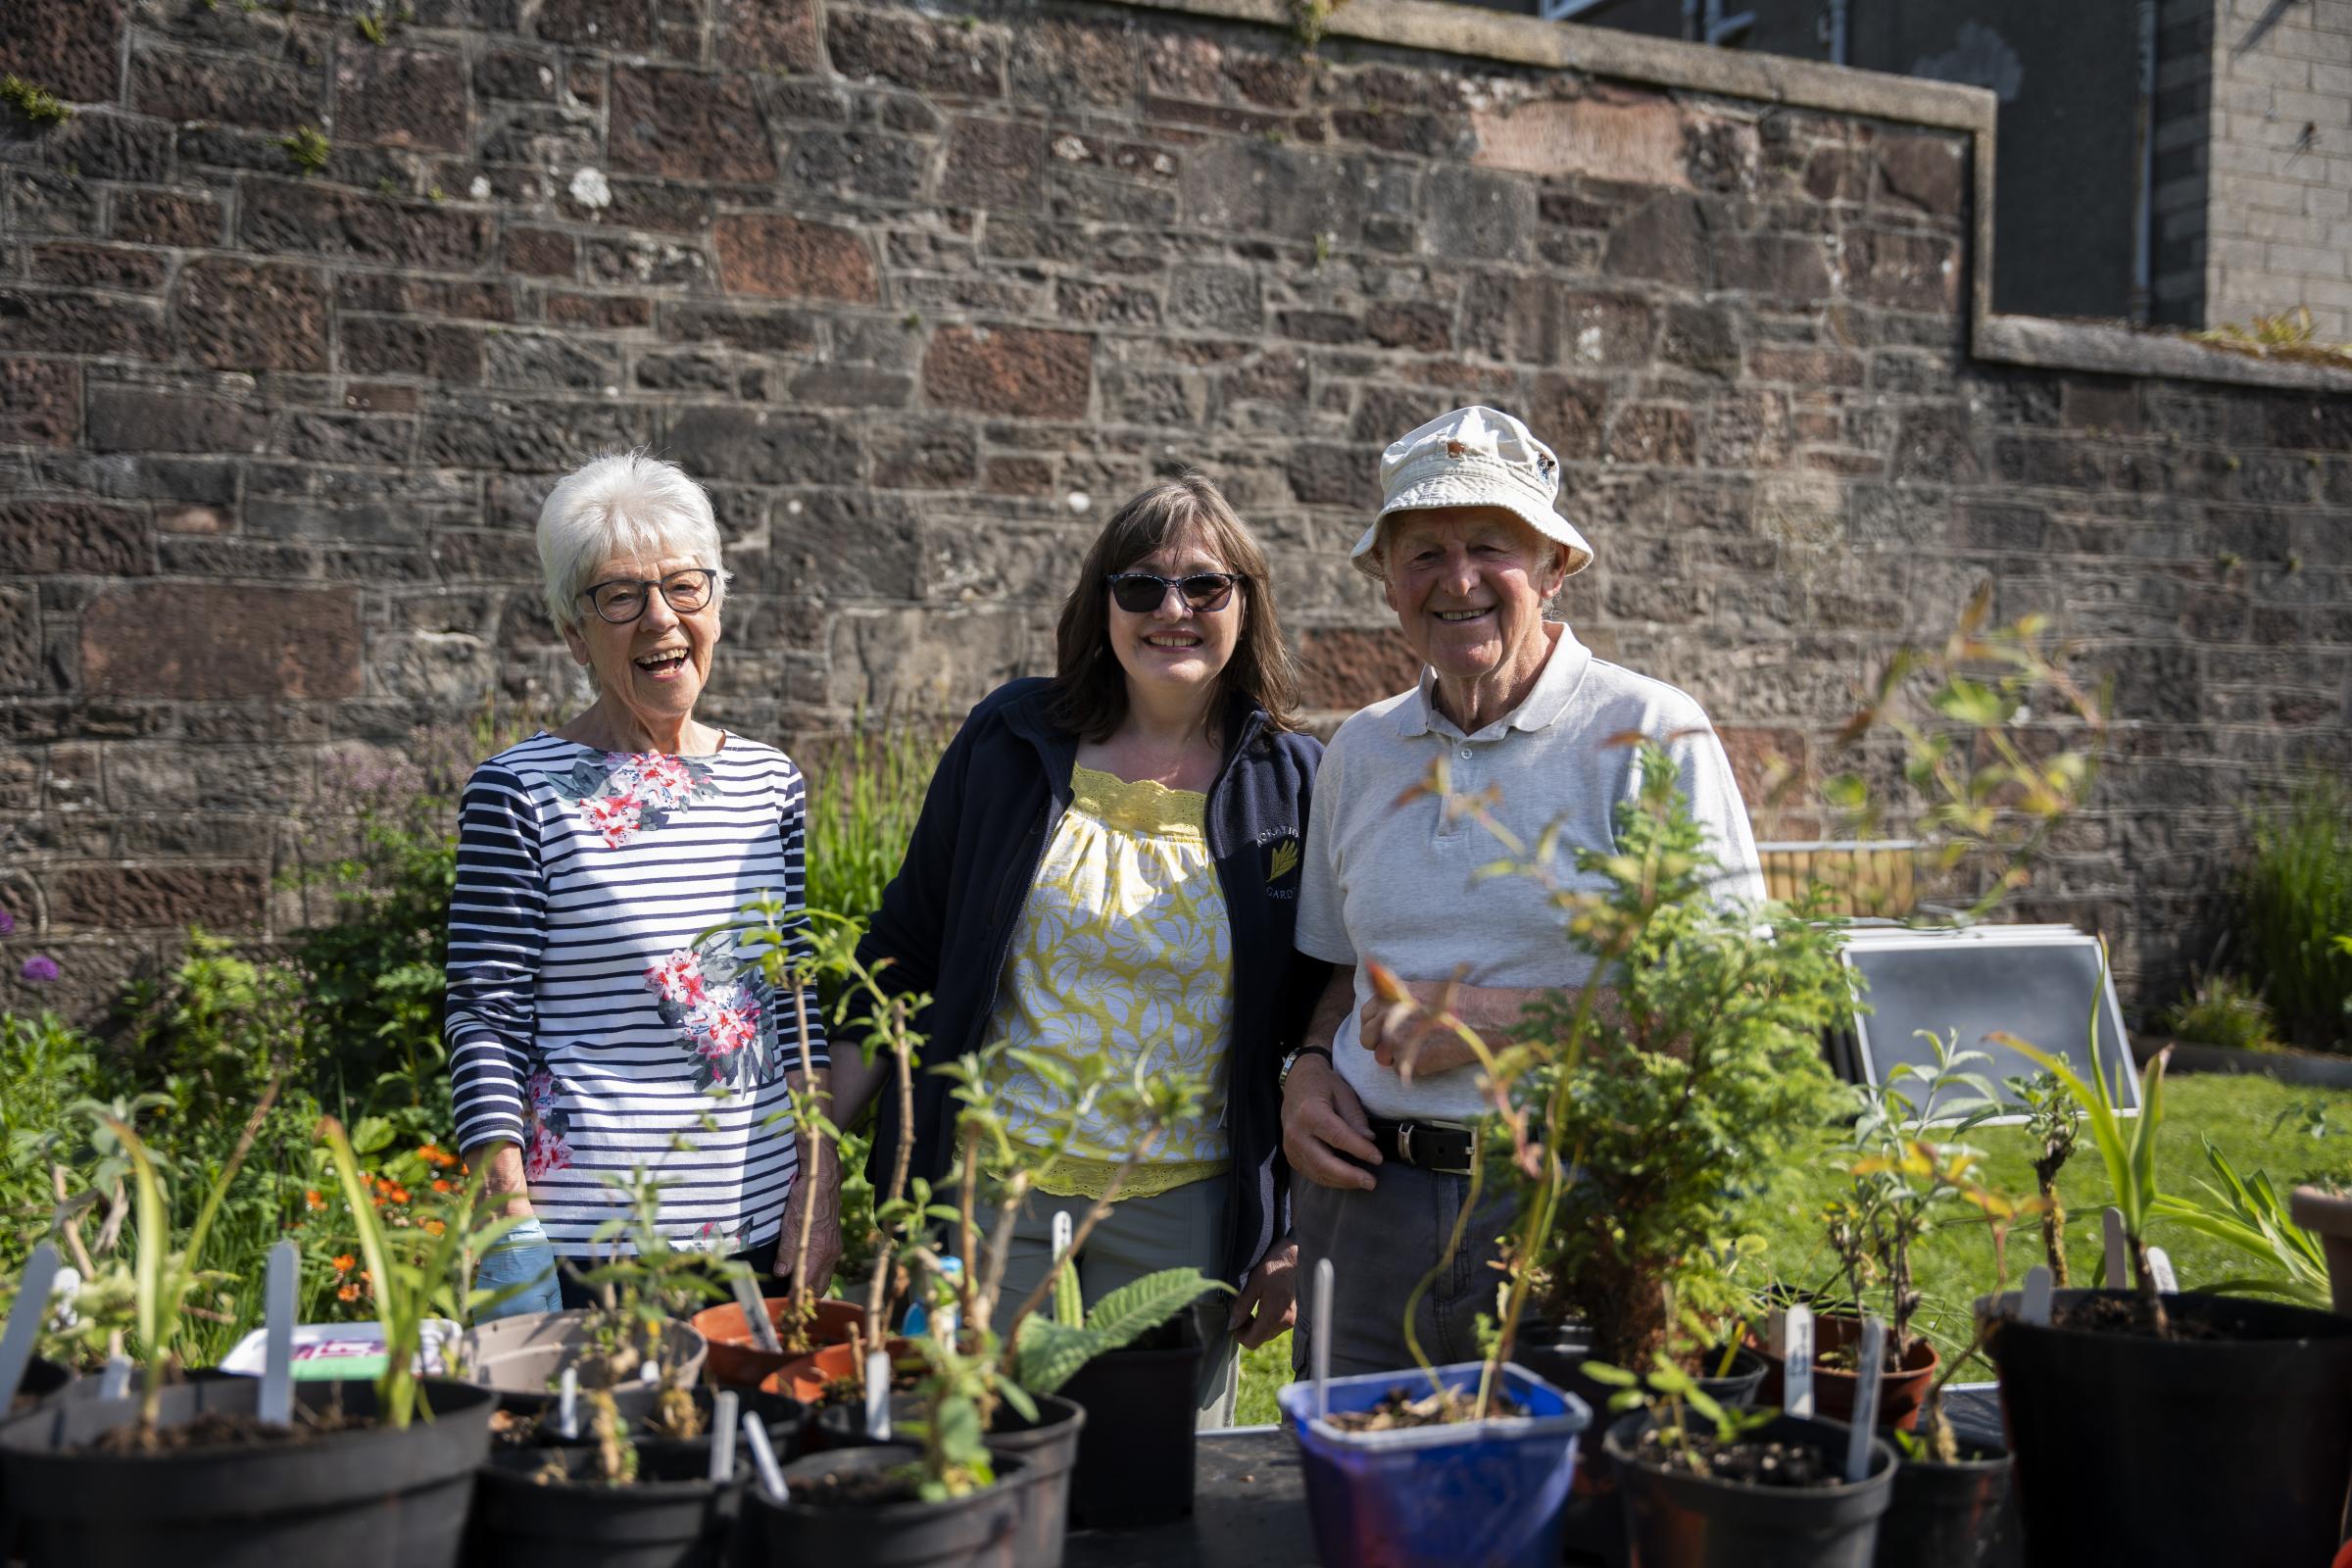 James Street Community Garden hosted a plant sale on May 11 (Photo: Ross Gardner)